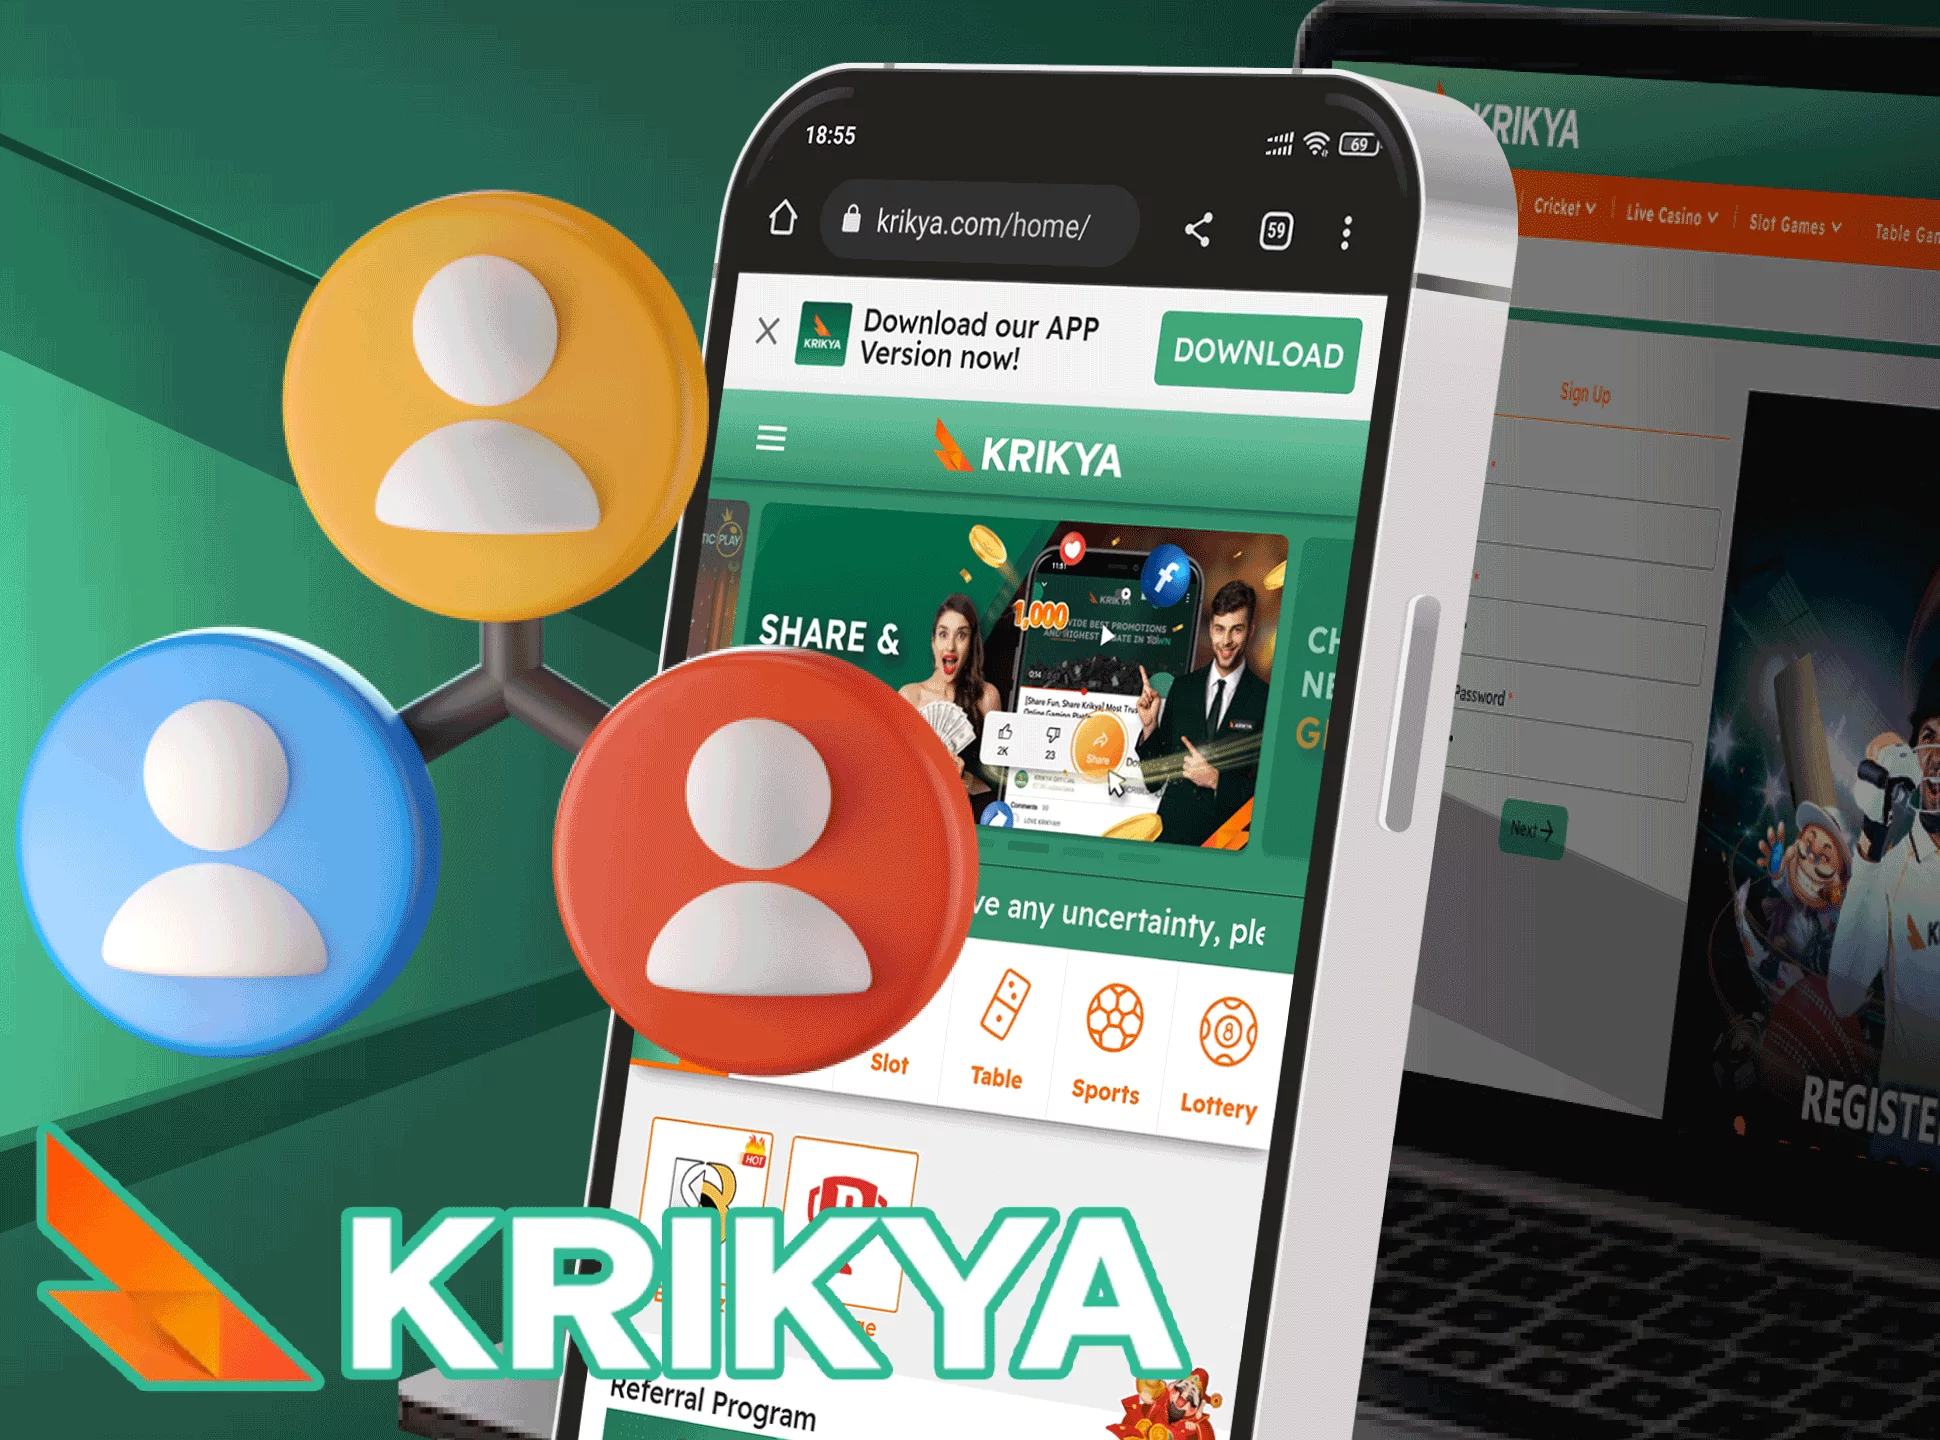 You can become closer with Krikya by joining its affiliate program.